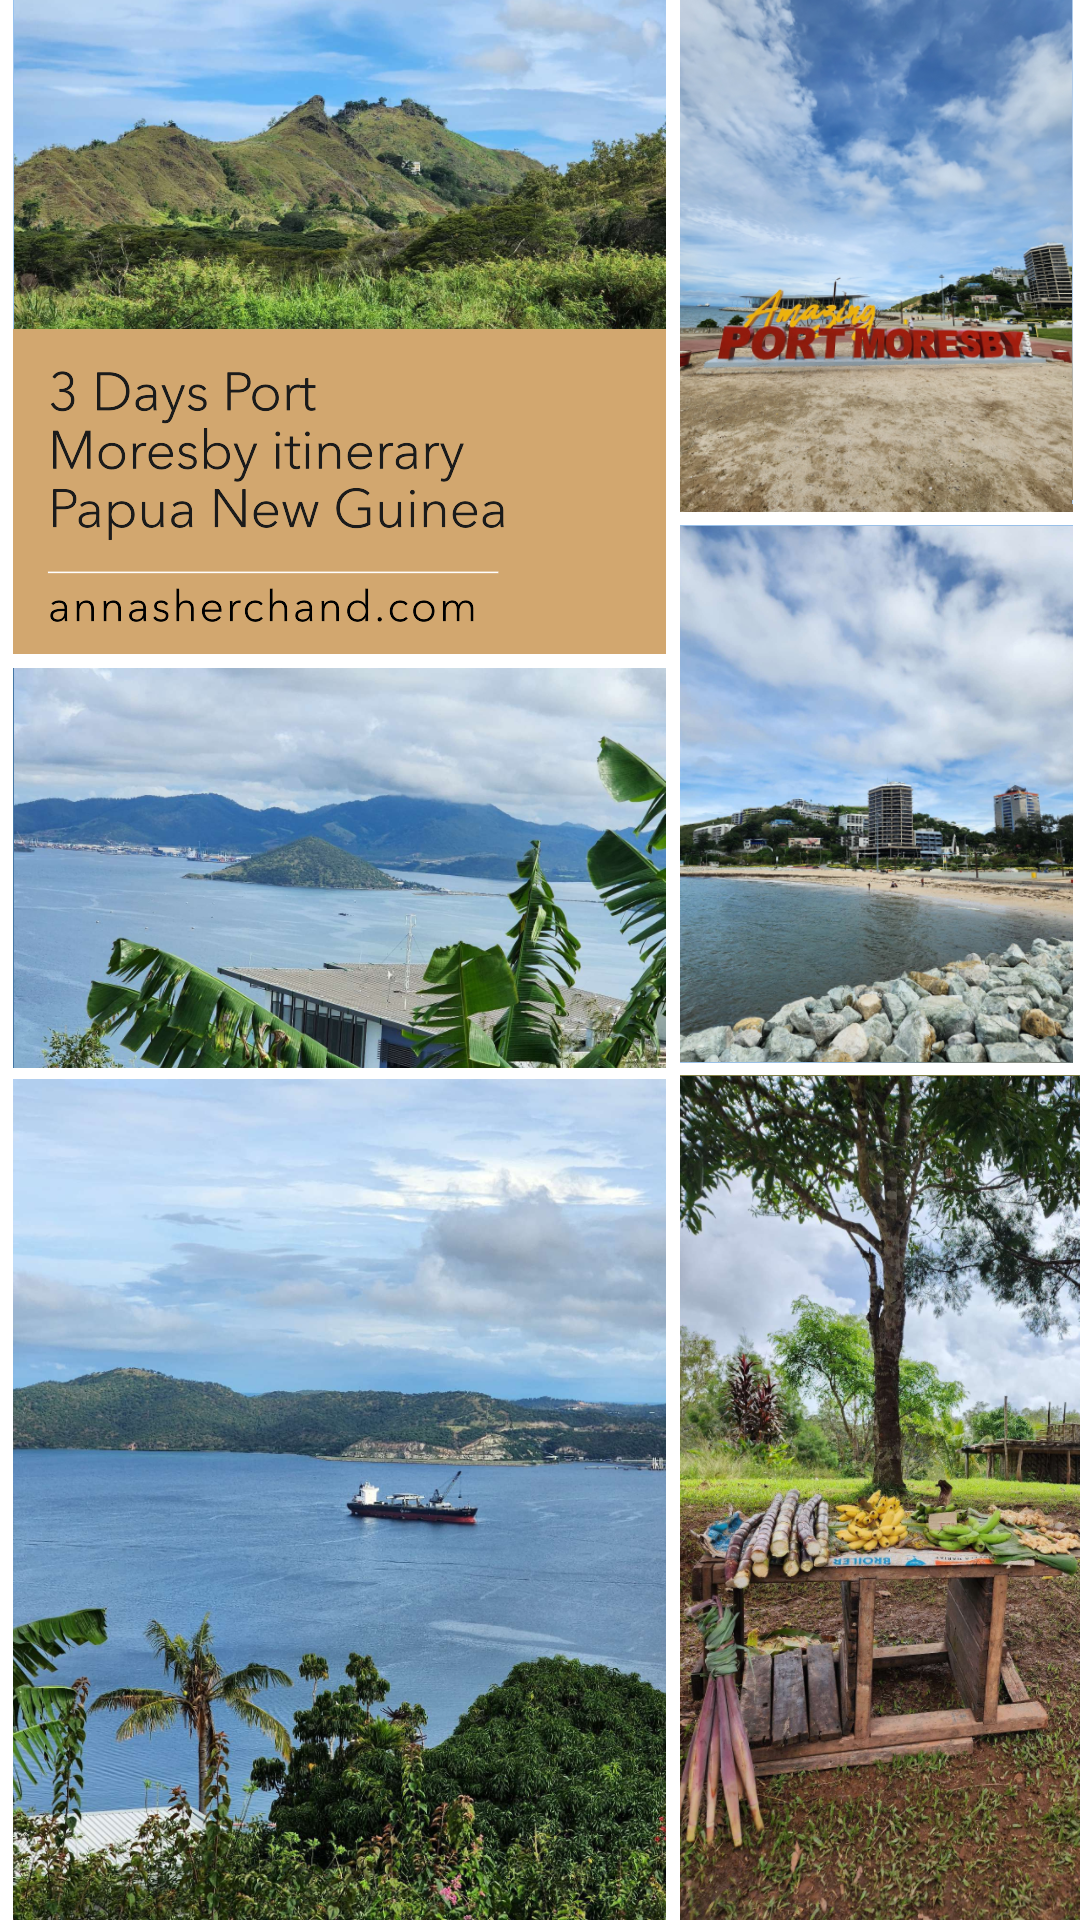 3 Days Port Moresby itinerary